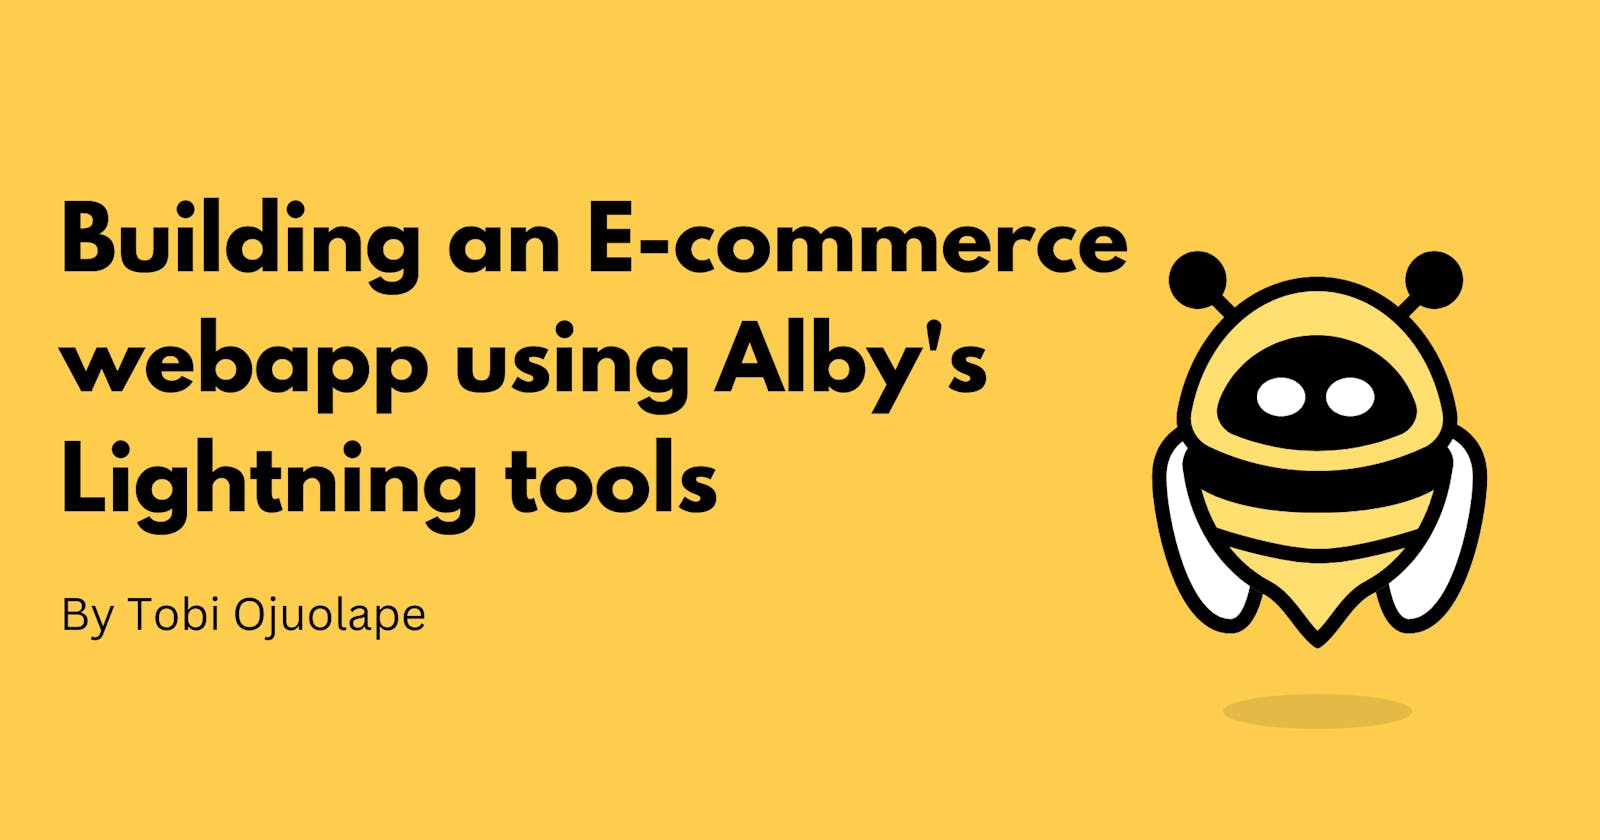 How to build a simple E-commerce web app using Alby's Lightning tools